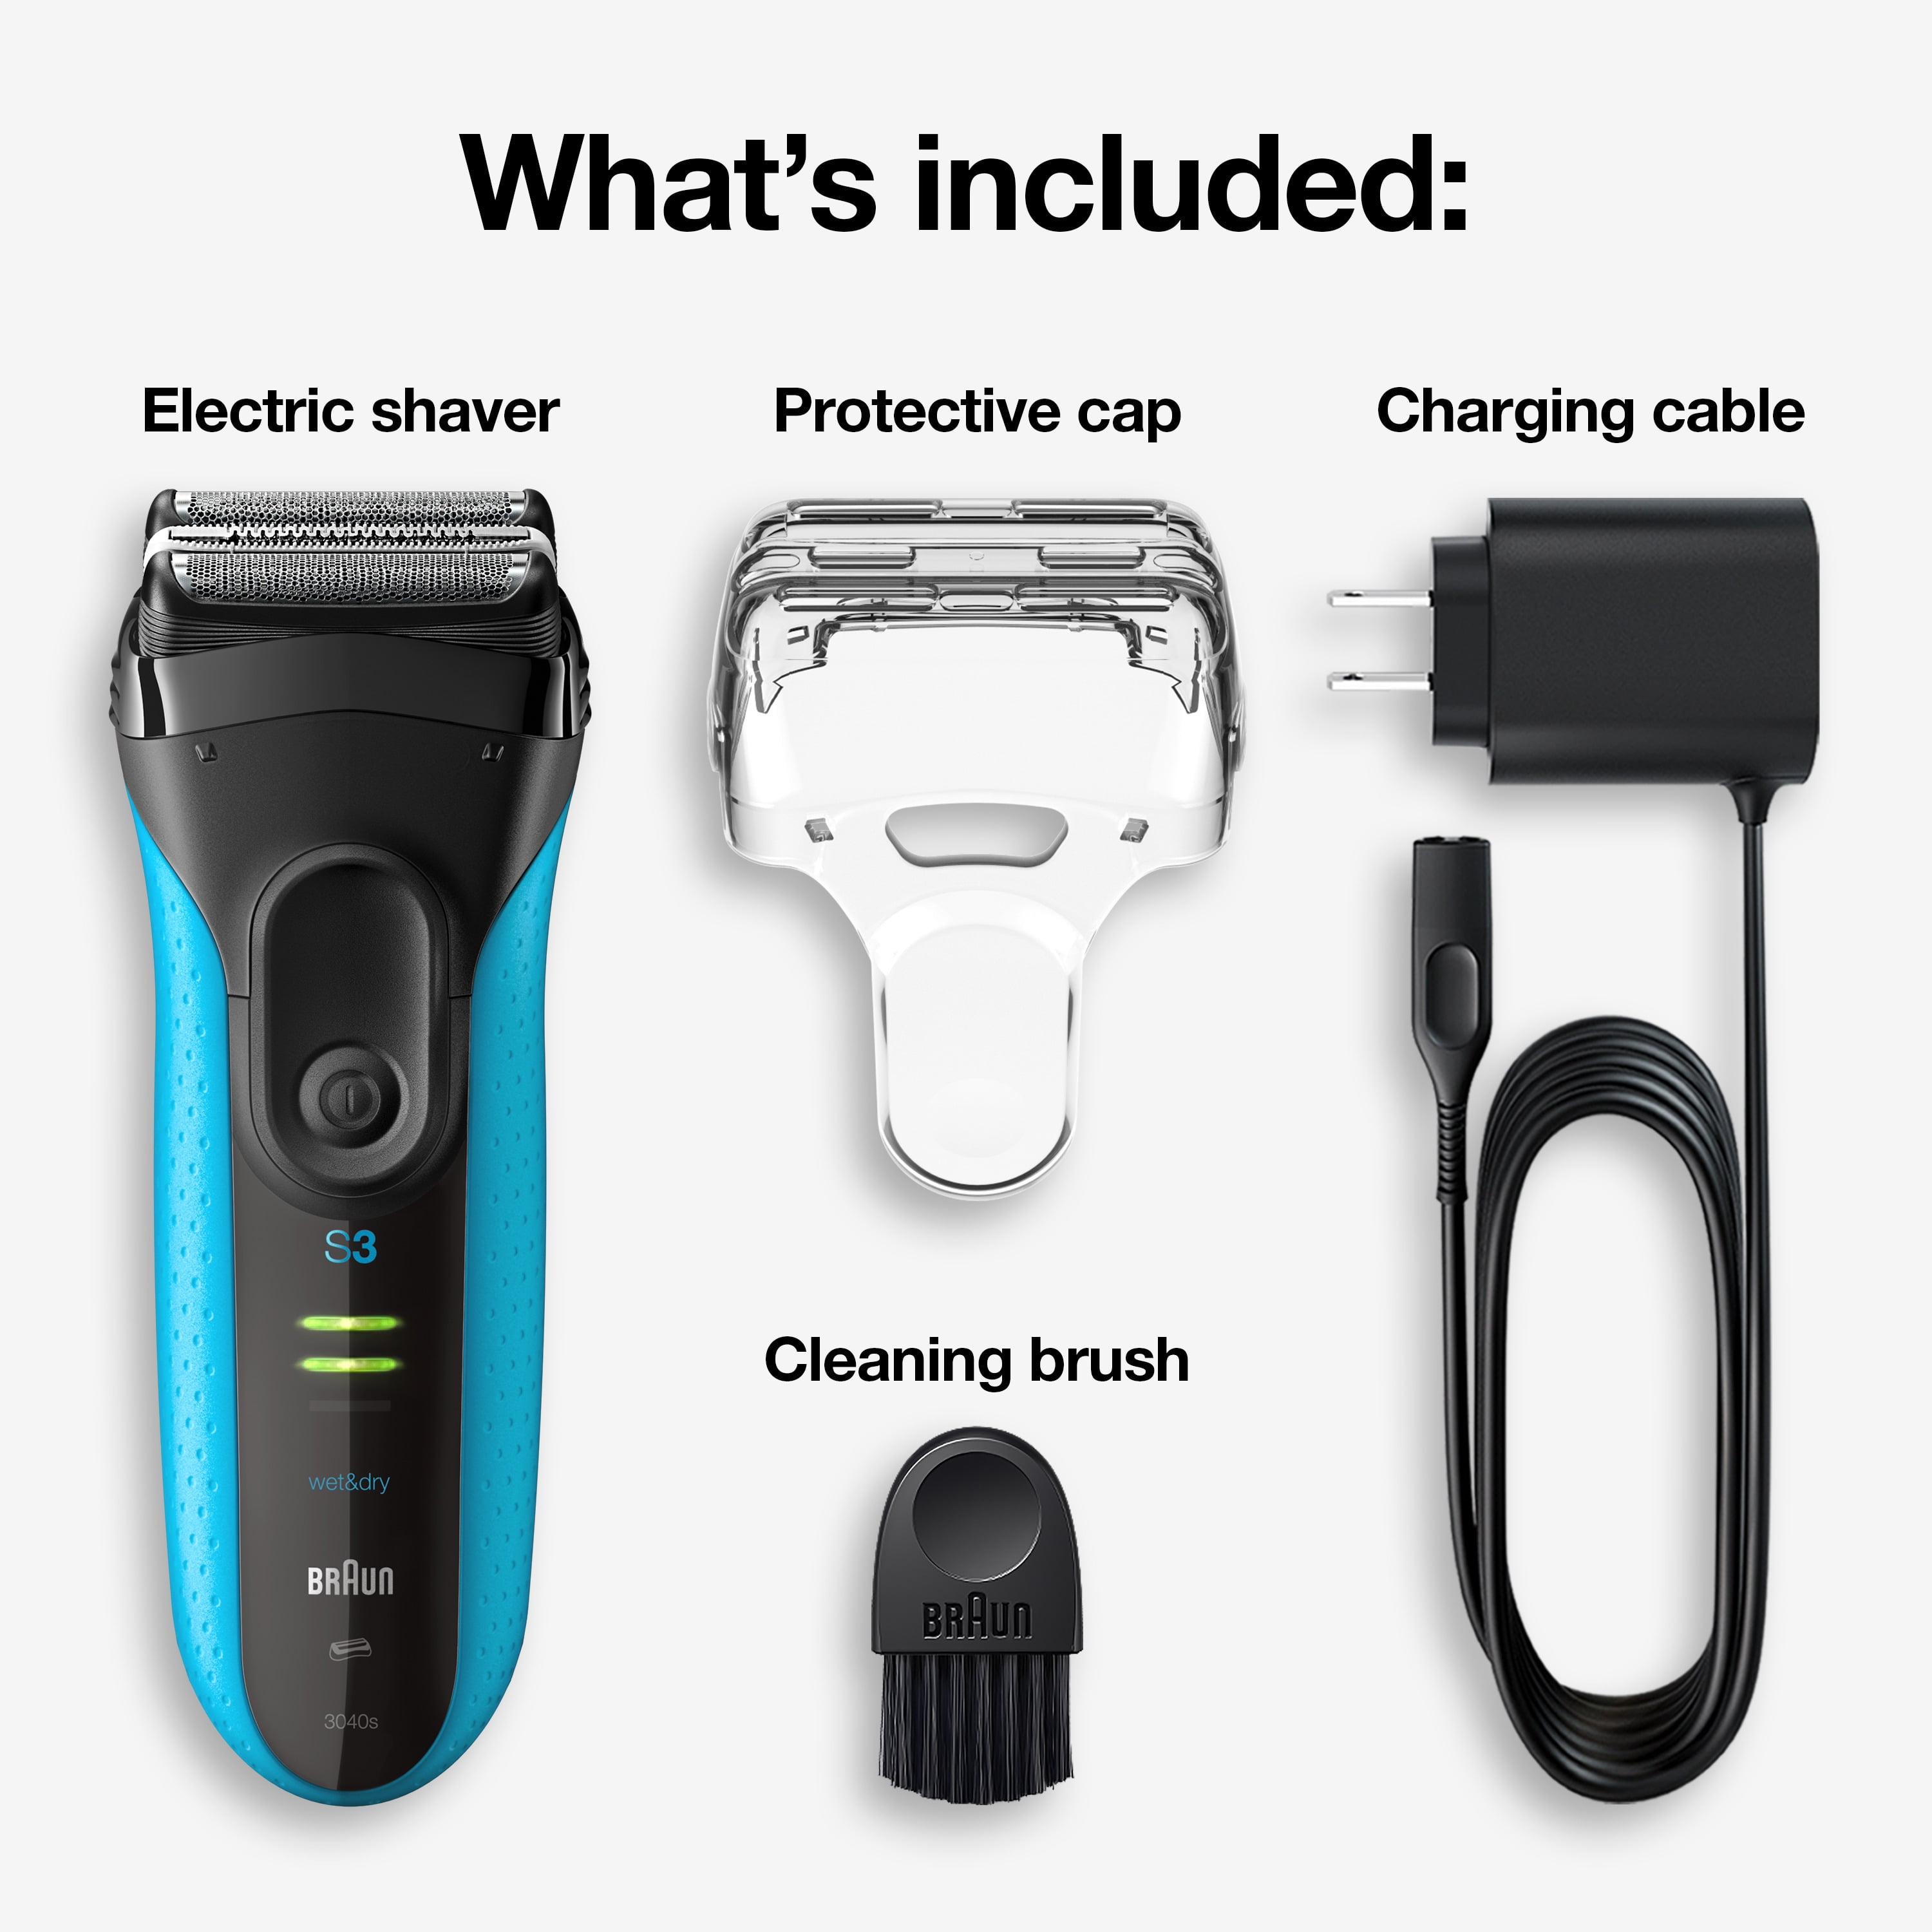 Braun Series ProSkin 3040s Rechargeable Dry Men's Electric Shaver Precision Trimmer - Walmart.com